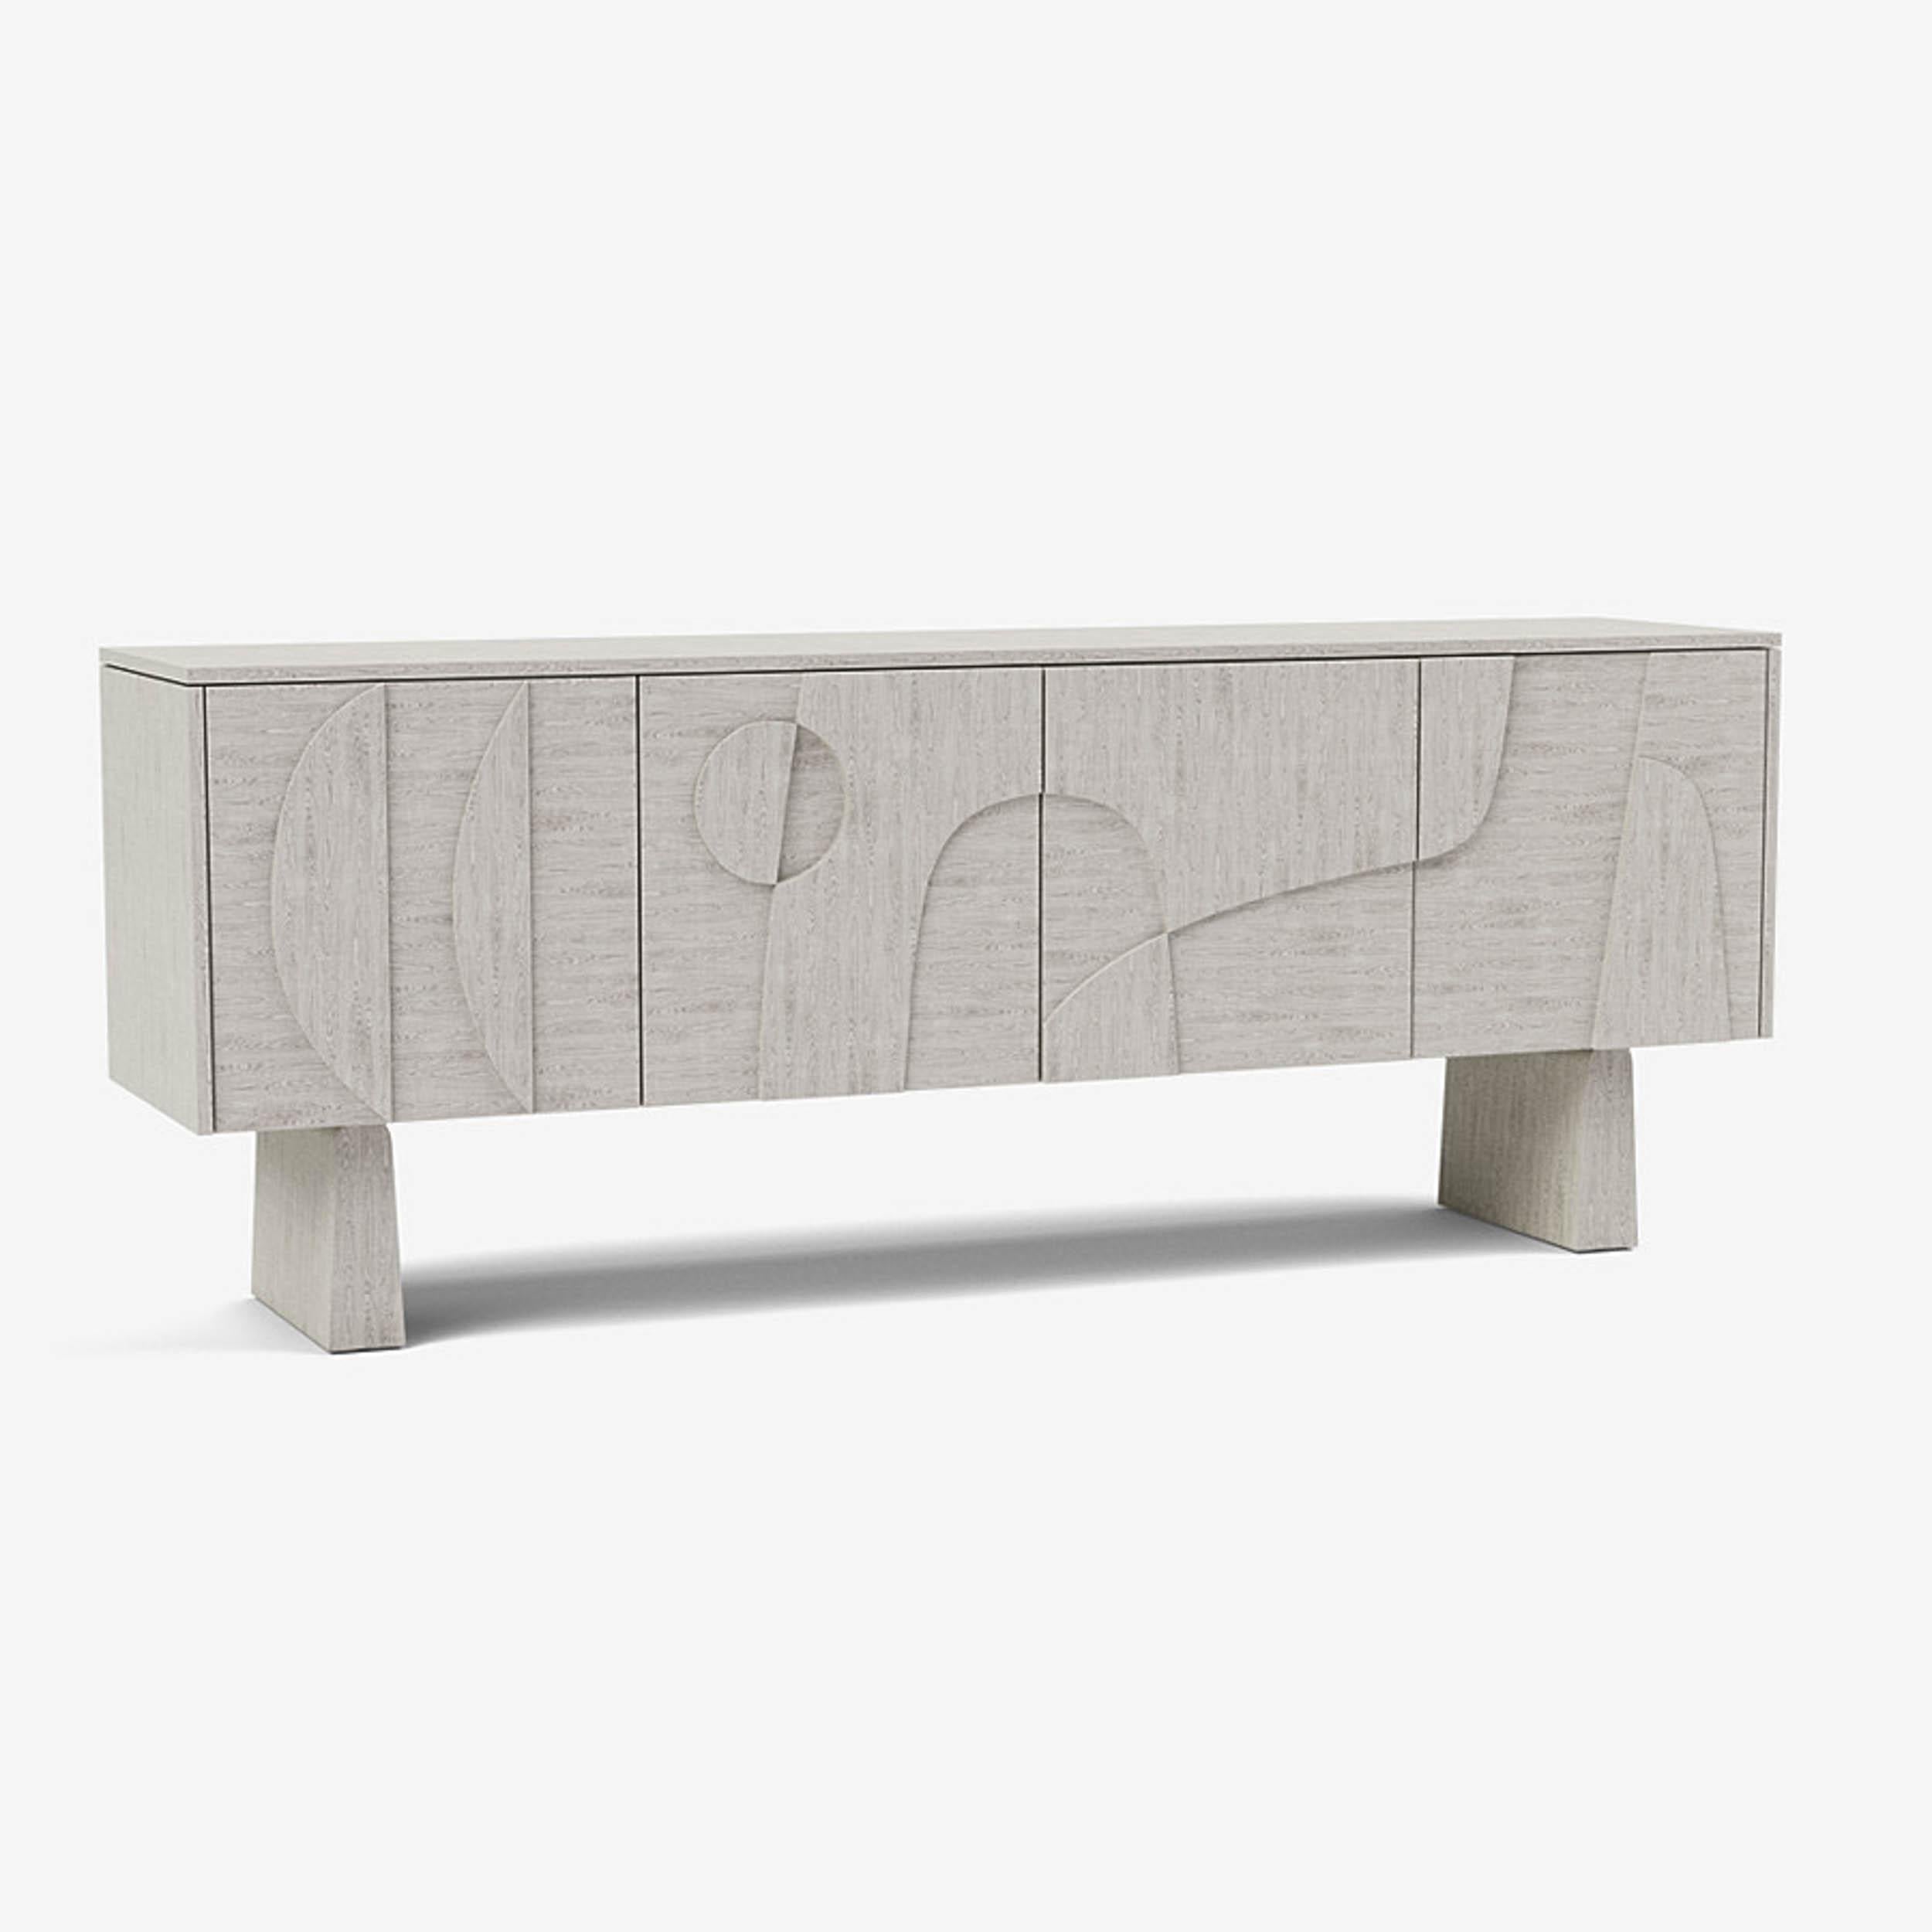 Contemporary 'Wynwood' 4 Sideboard by Man of Parts, Whiskey Oak, Short Legs For Sale 6